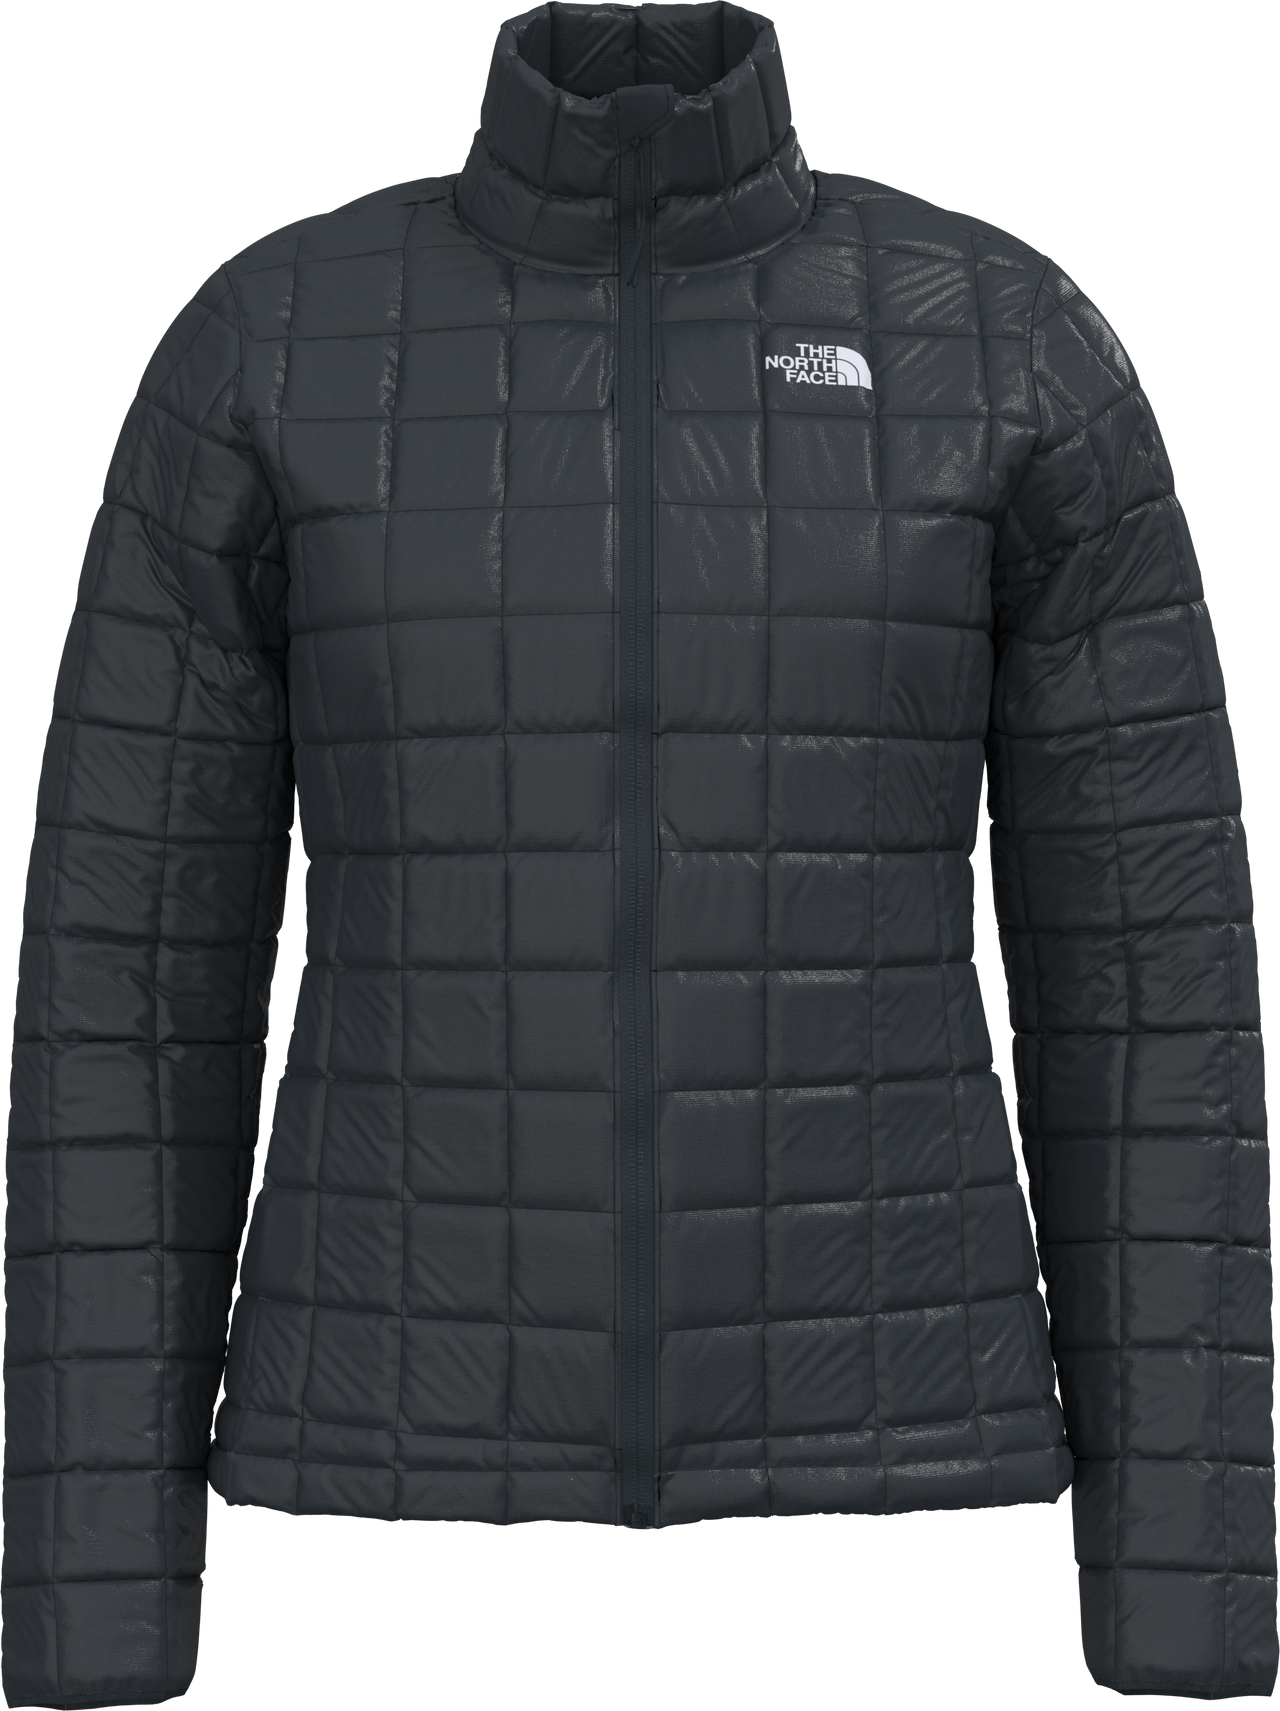 The North Face Apparel Women's Thermoball Eco Jacket 2.0 Tnf Black